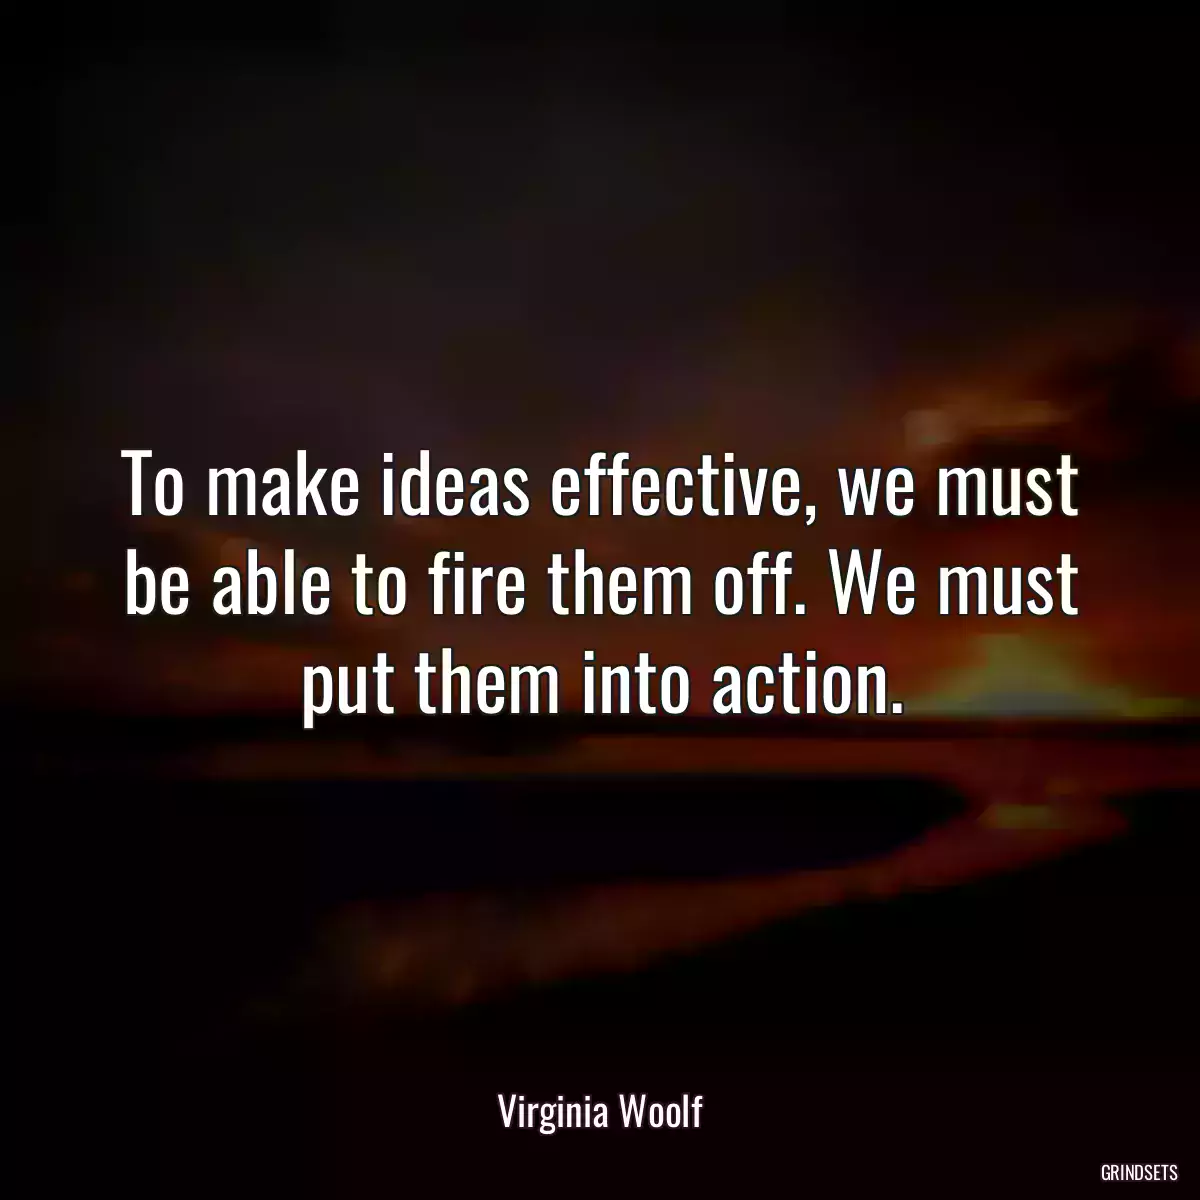 To make ideas effective, we must be able to fire them off. We must put them into action.